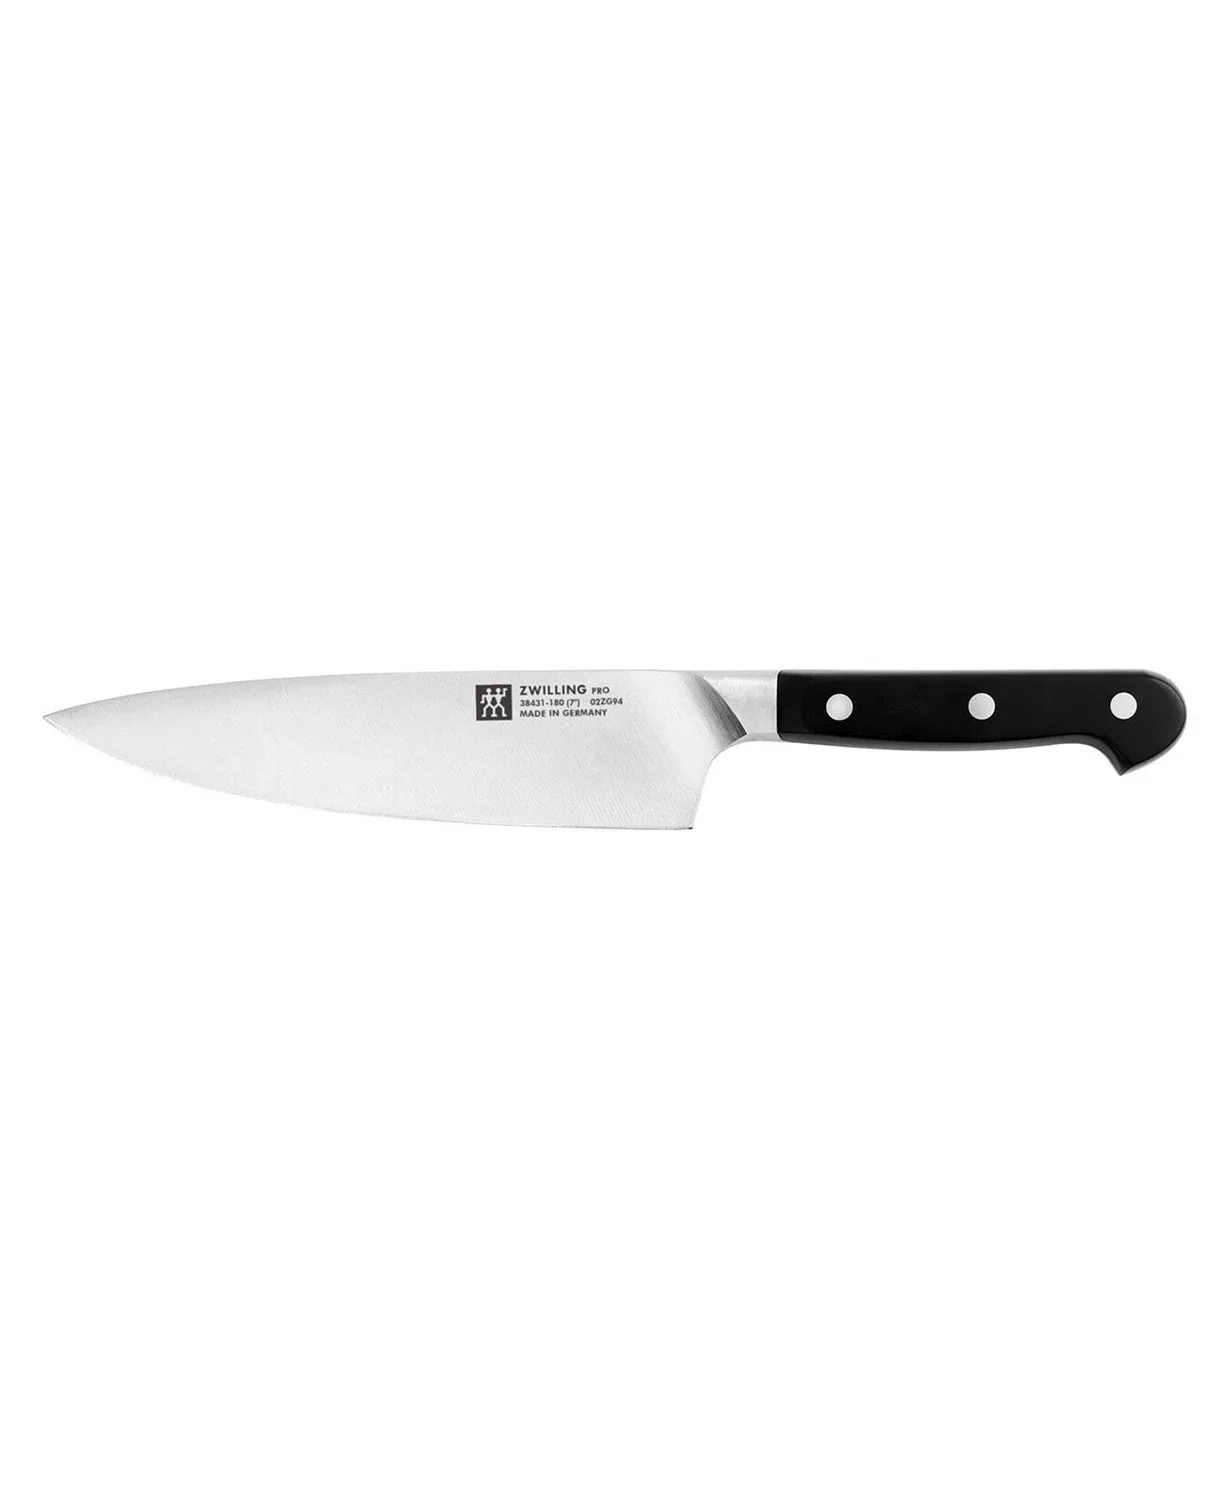 The best Black Friday kitchen knife sales are happening all November long